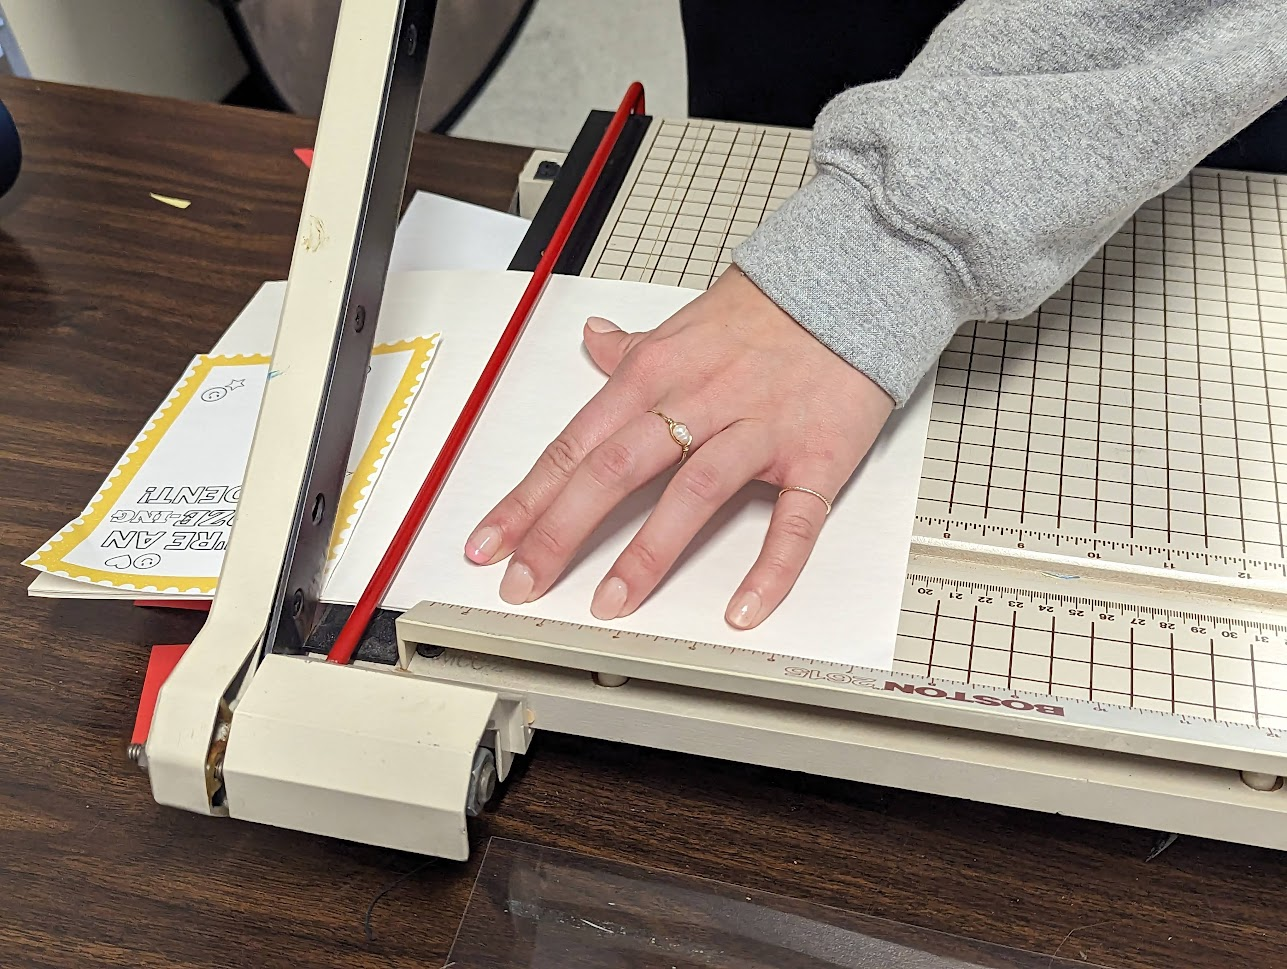 close-up photo of hands aligning paper in a paper cutter